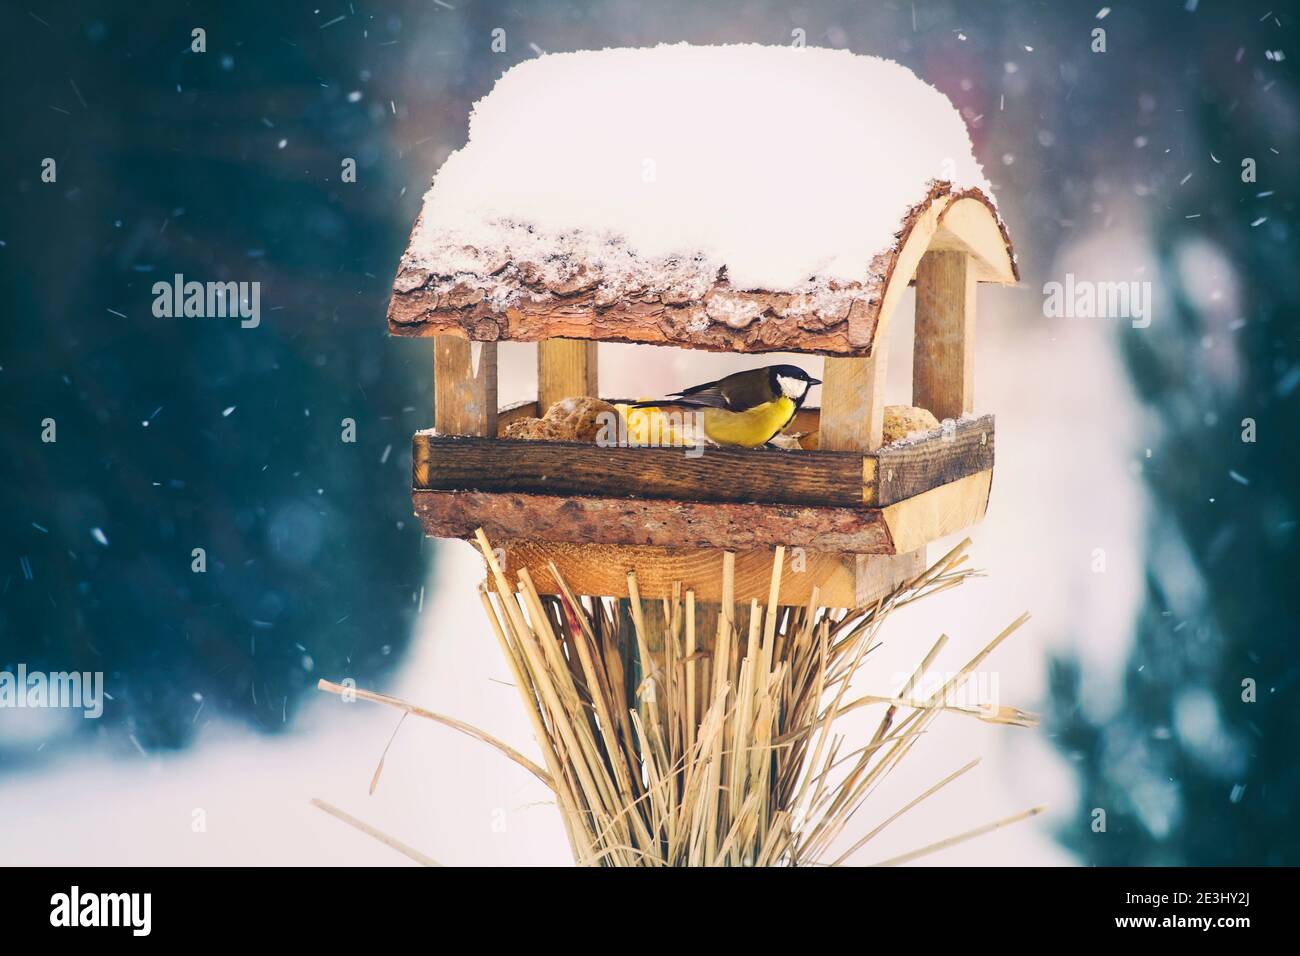 Great tit sitting on bird feeder covered with falling snow in winter with blurred background Stock Photo